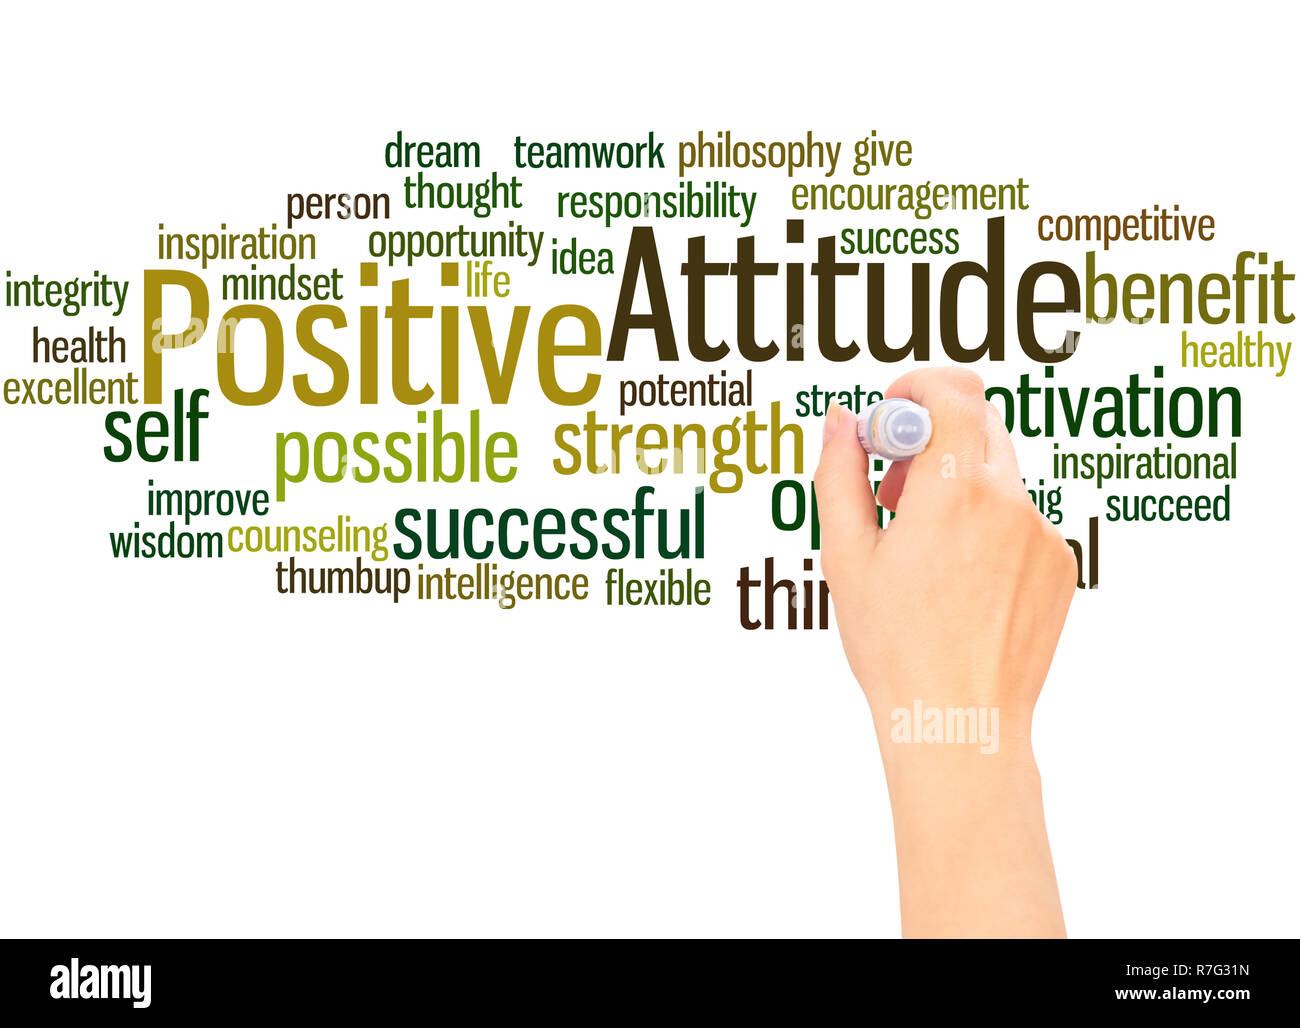 Positive Attitude word cloud hand writing concept on white background. Stock Photo